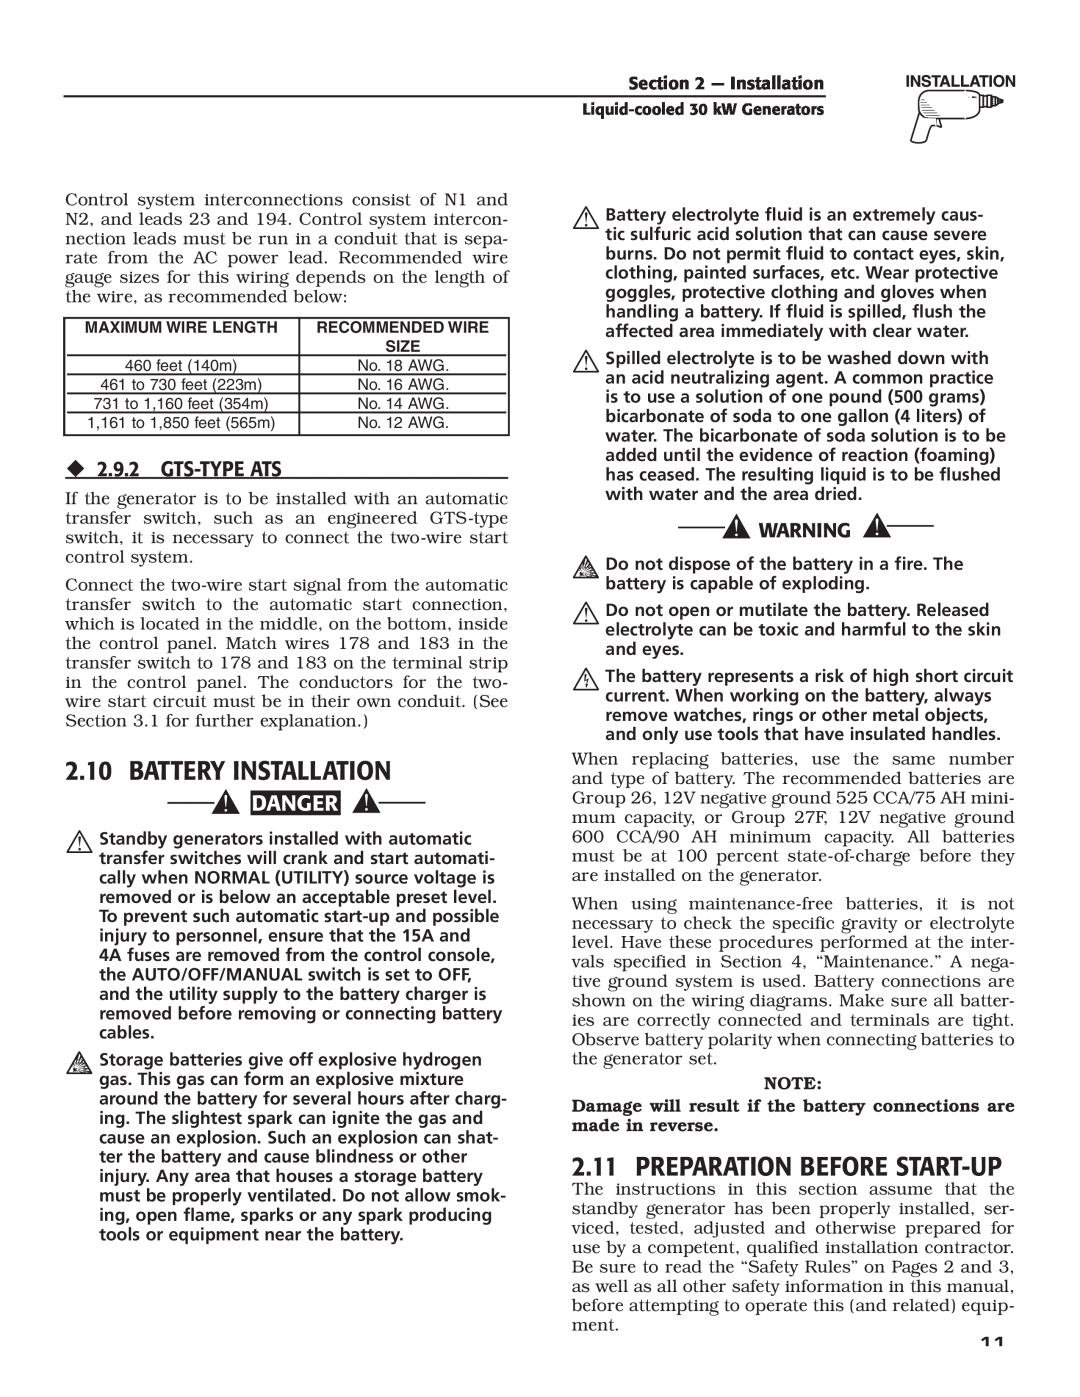 Generac Power Systems 004988-4 owner manual Battery Installation, Preparation Before Start-Up, ‹ 2.9.2 GTS-TYPE ATS, Danger 